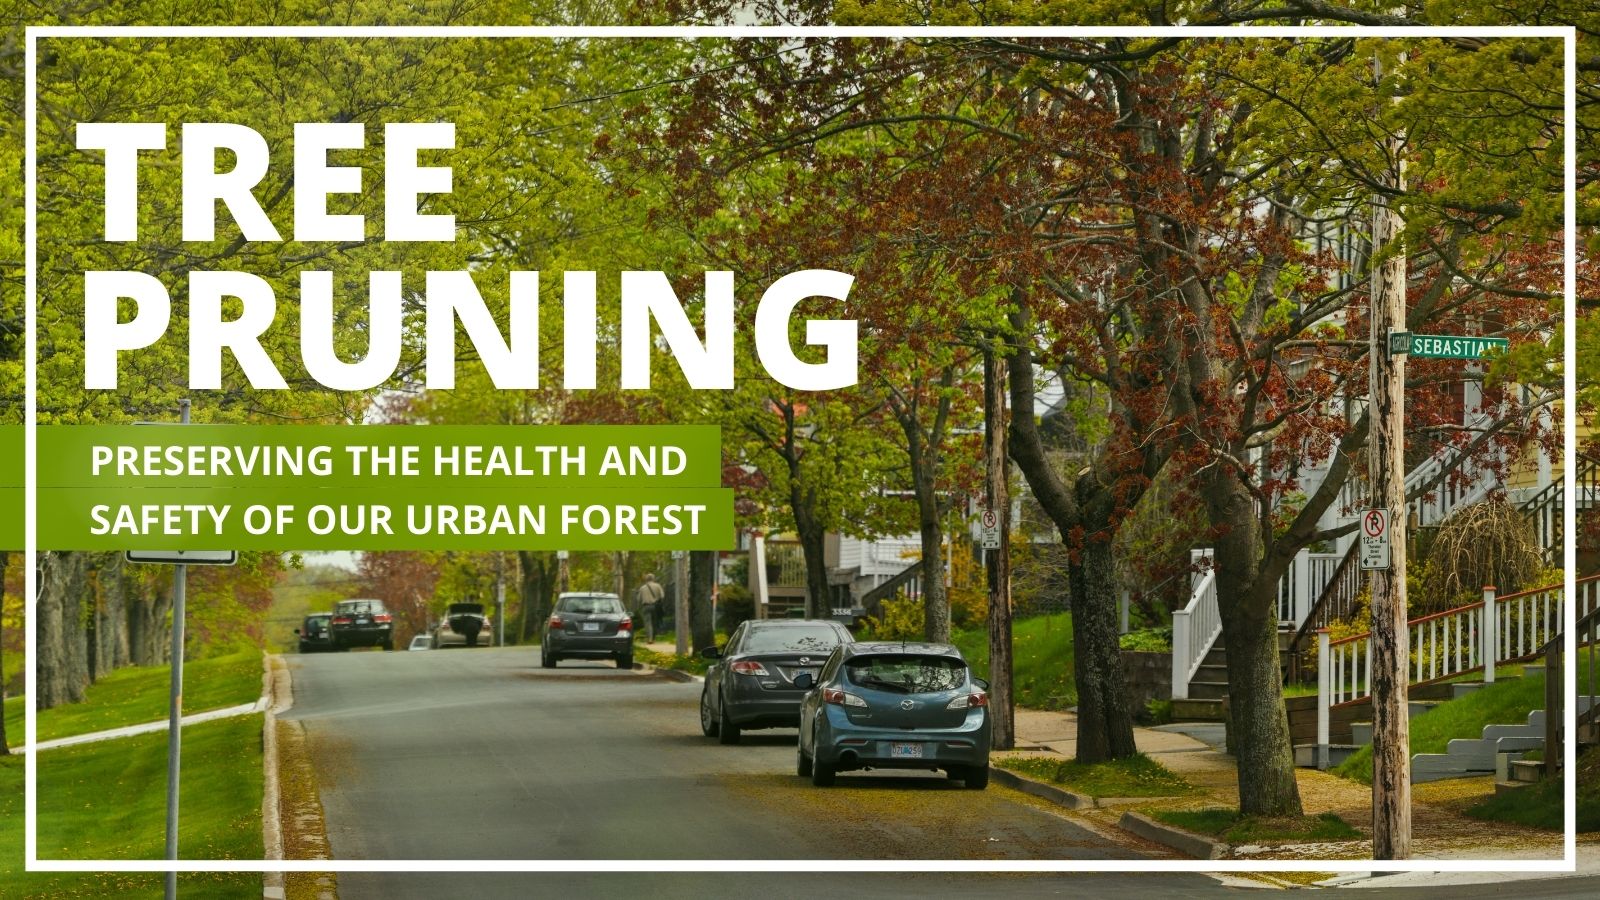 The words "tree pruning, preserving the health and safety of our urban forest" over an image of a tree-lined street